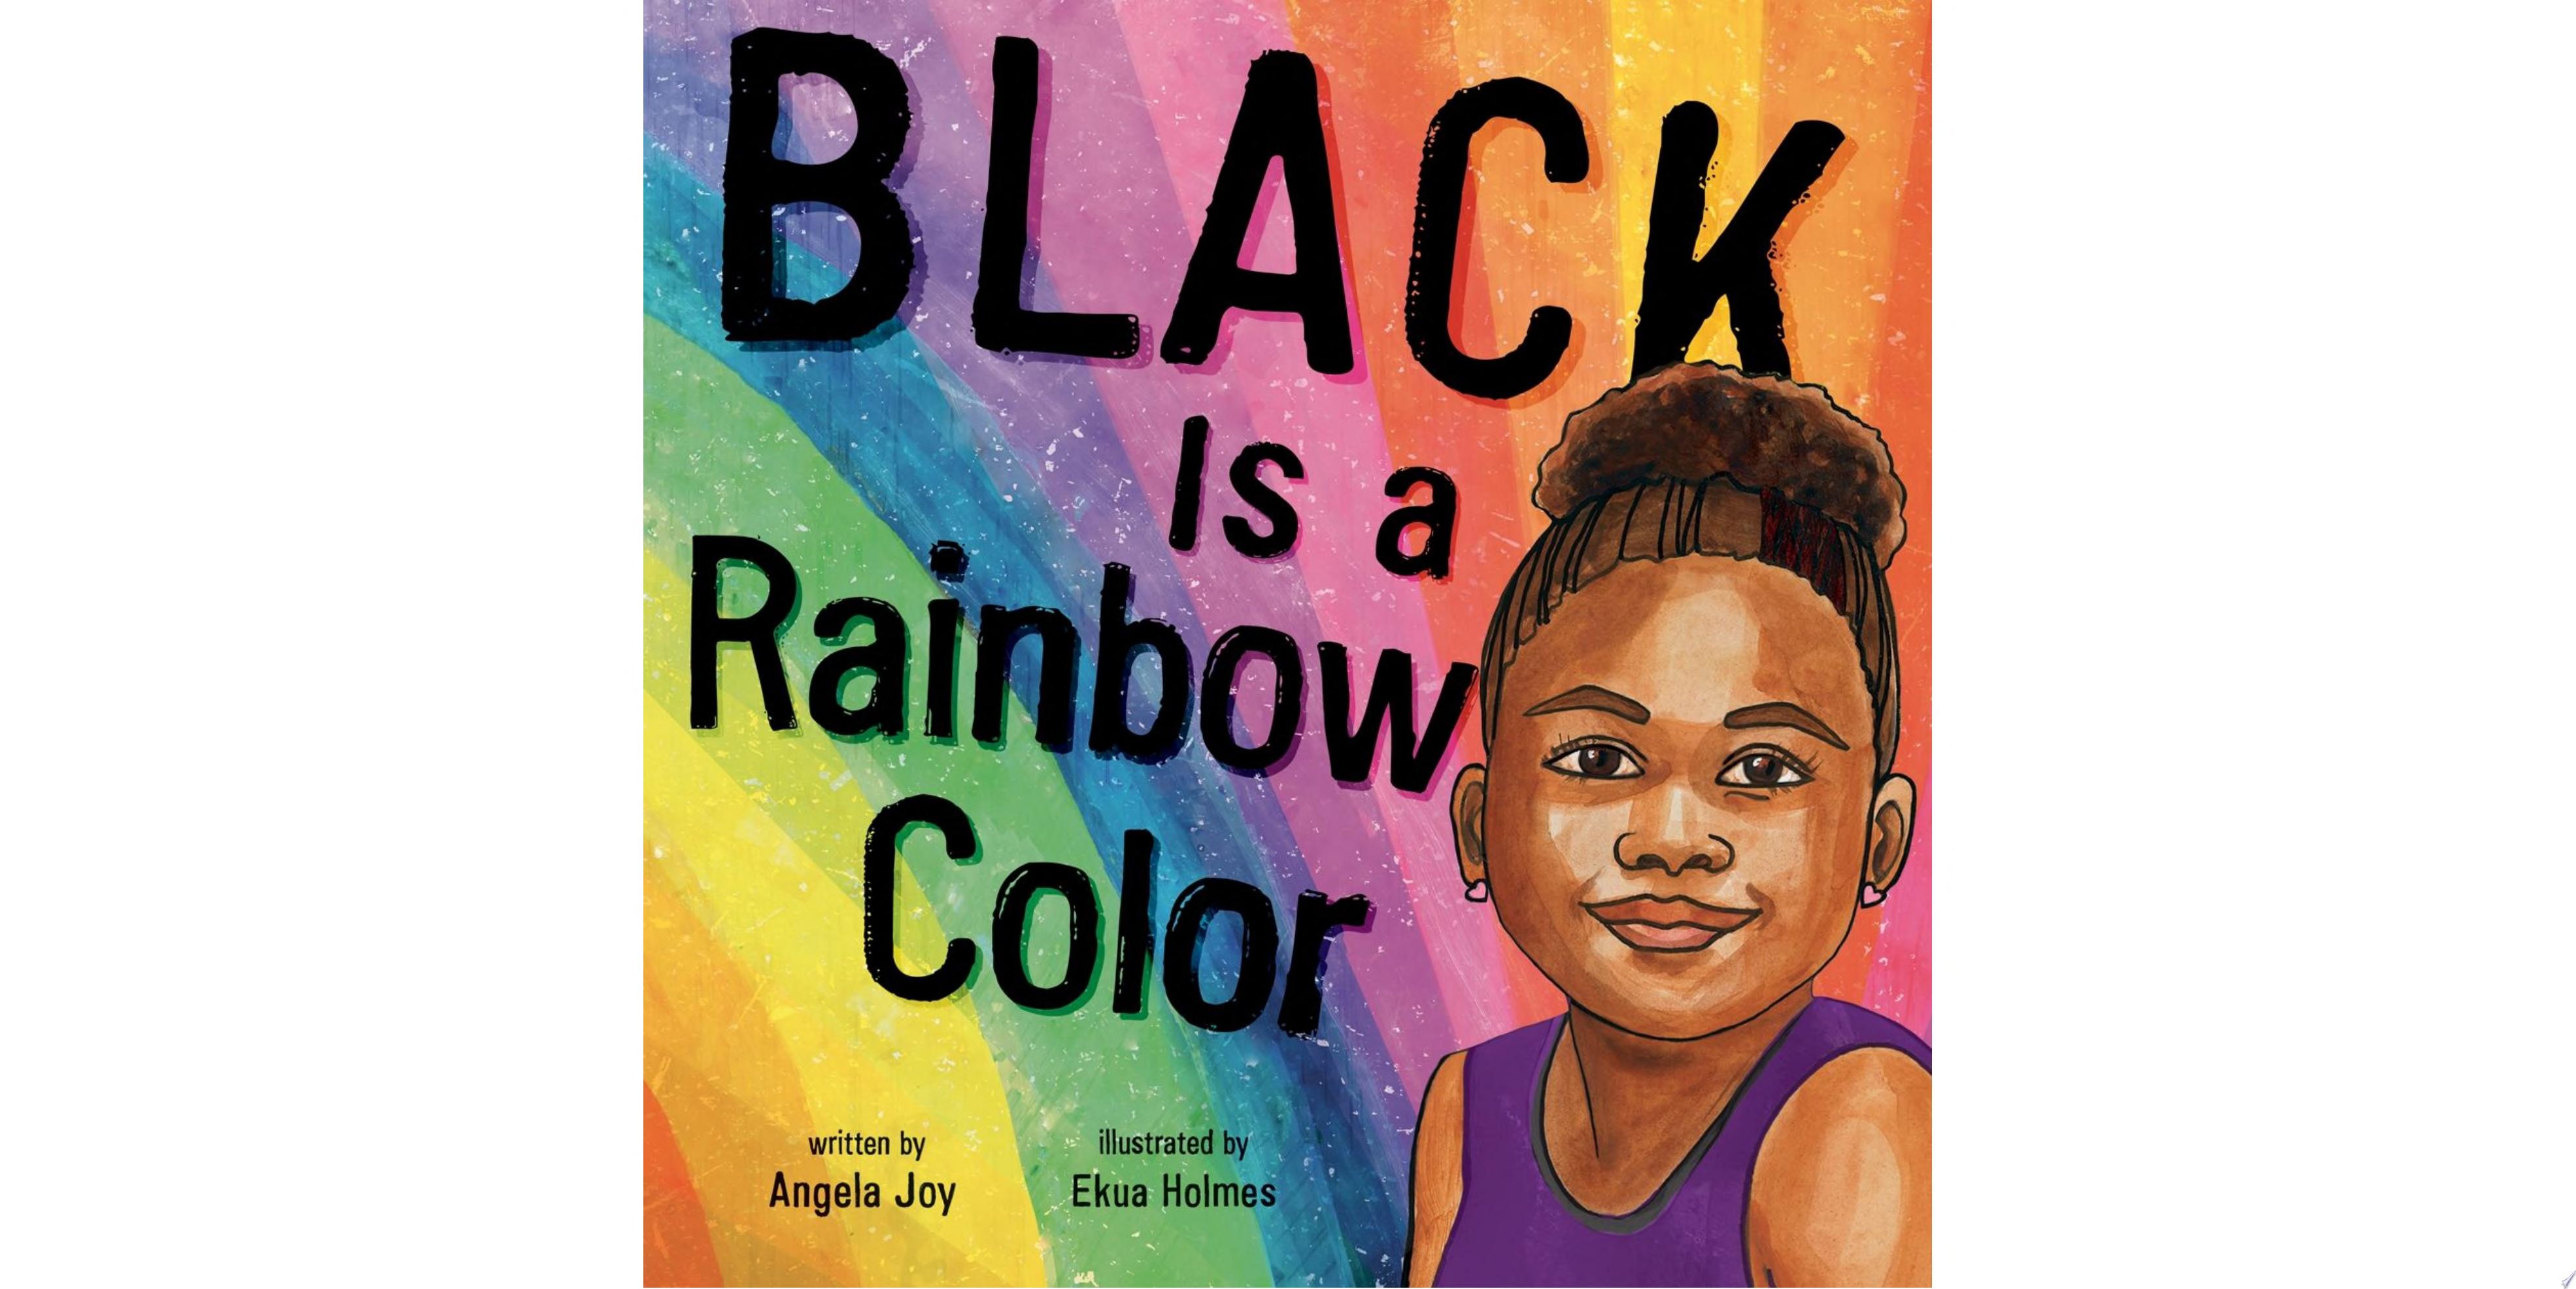 Image for "Black Is a Rainbow Color"